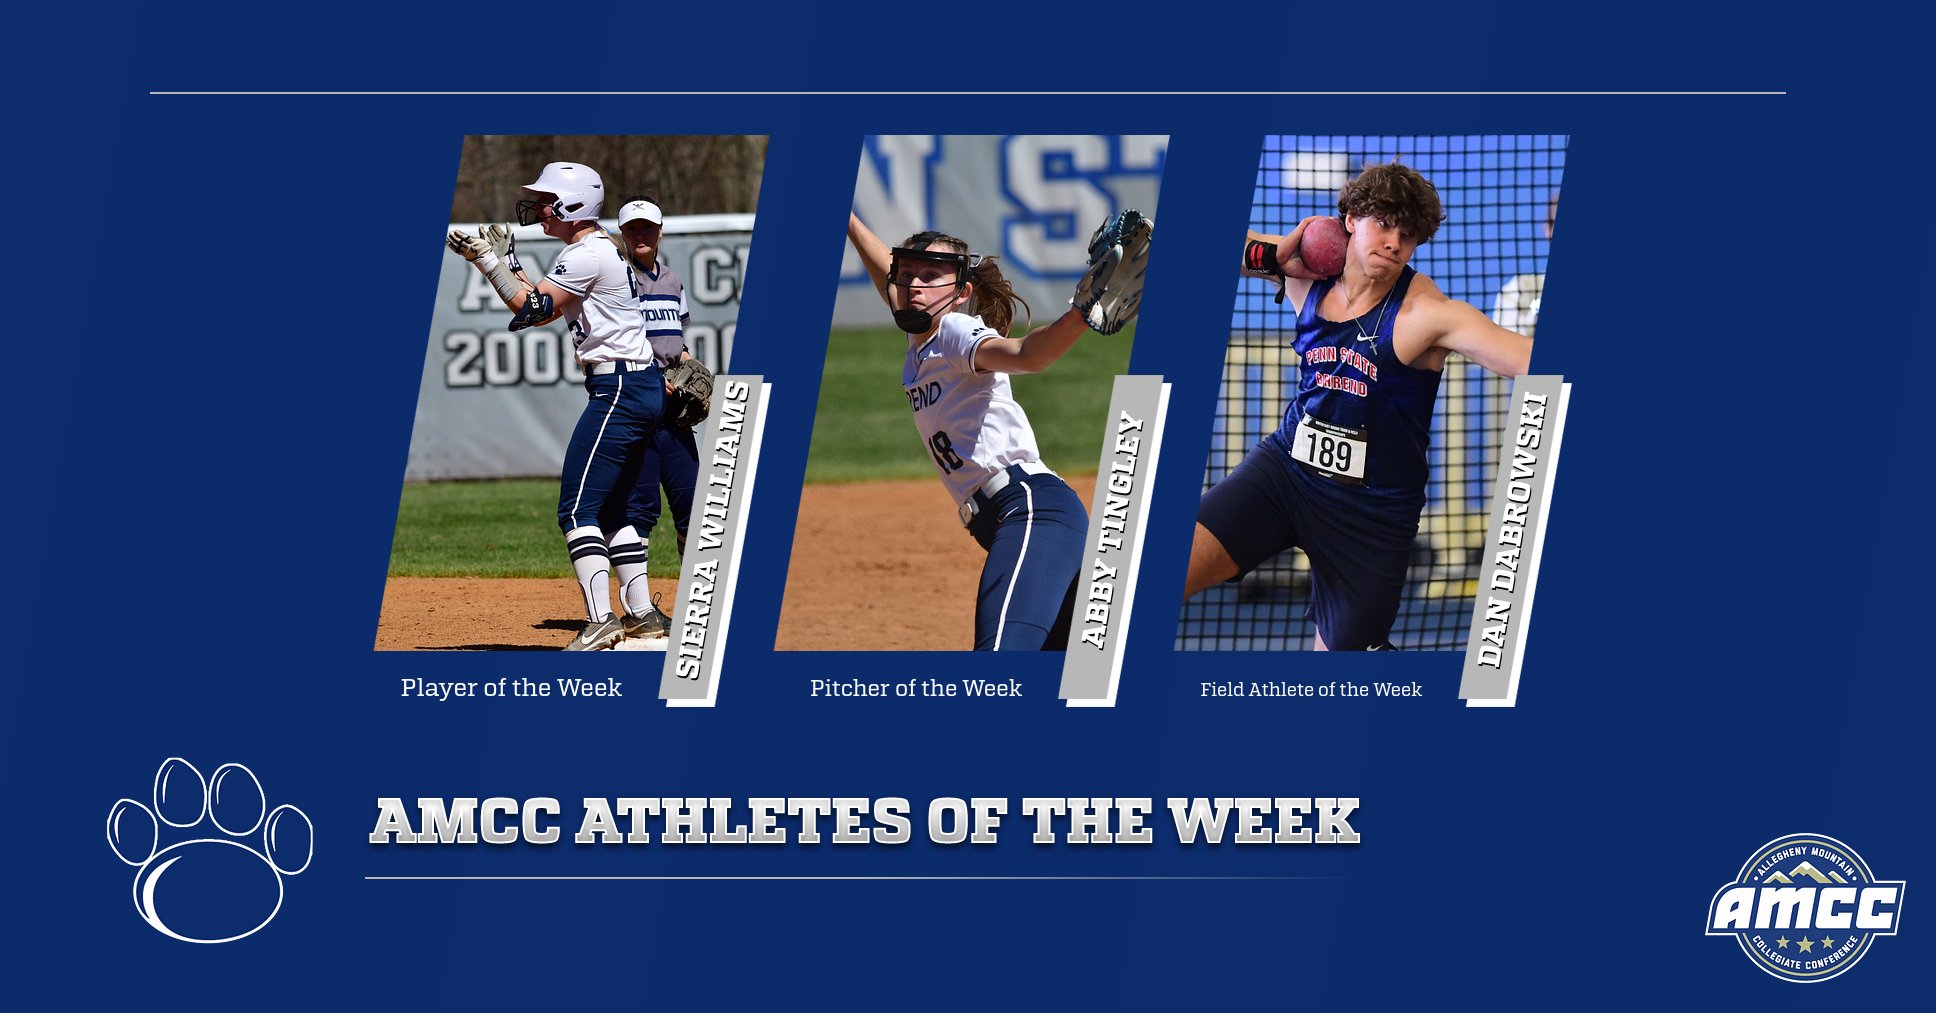 Behrend Softball Sweeps AMCC Weekly Awards; Dabrowski Named Field Athlete of the Week